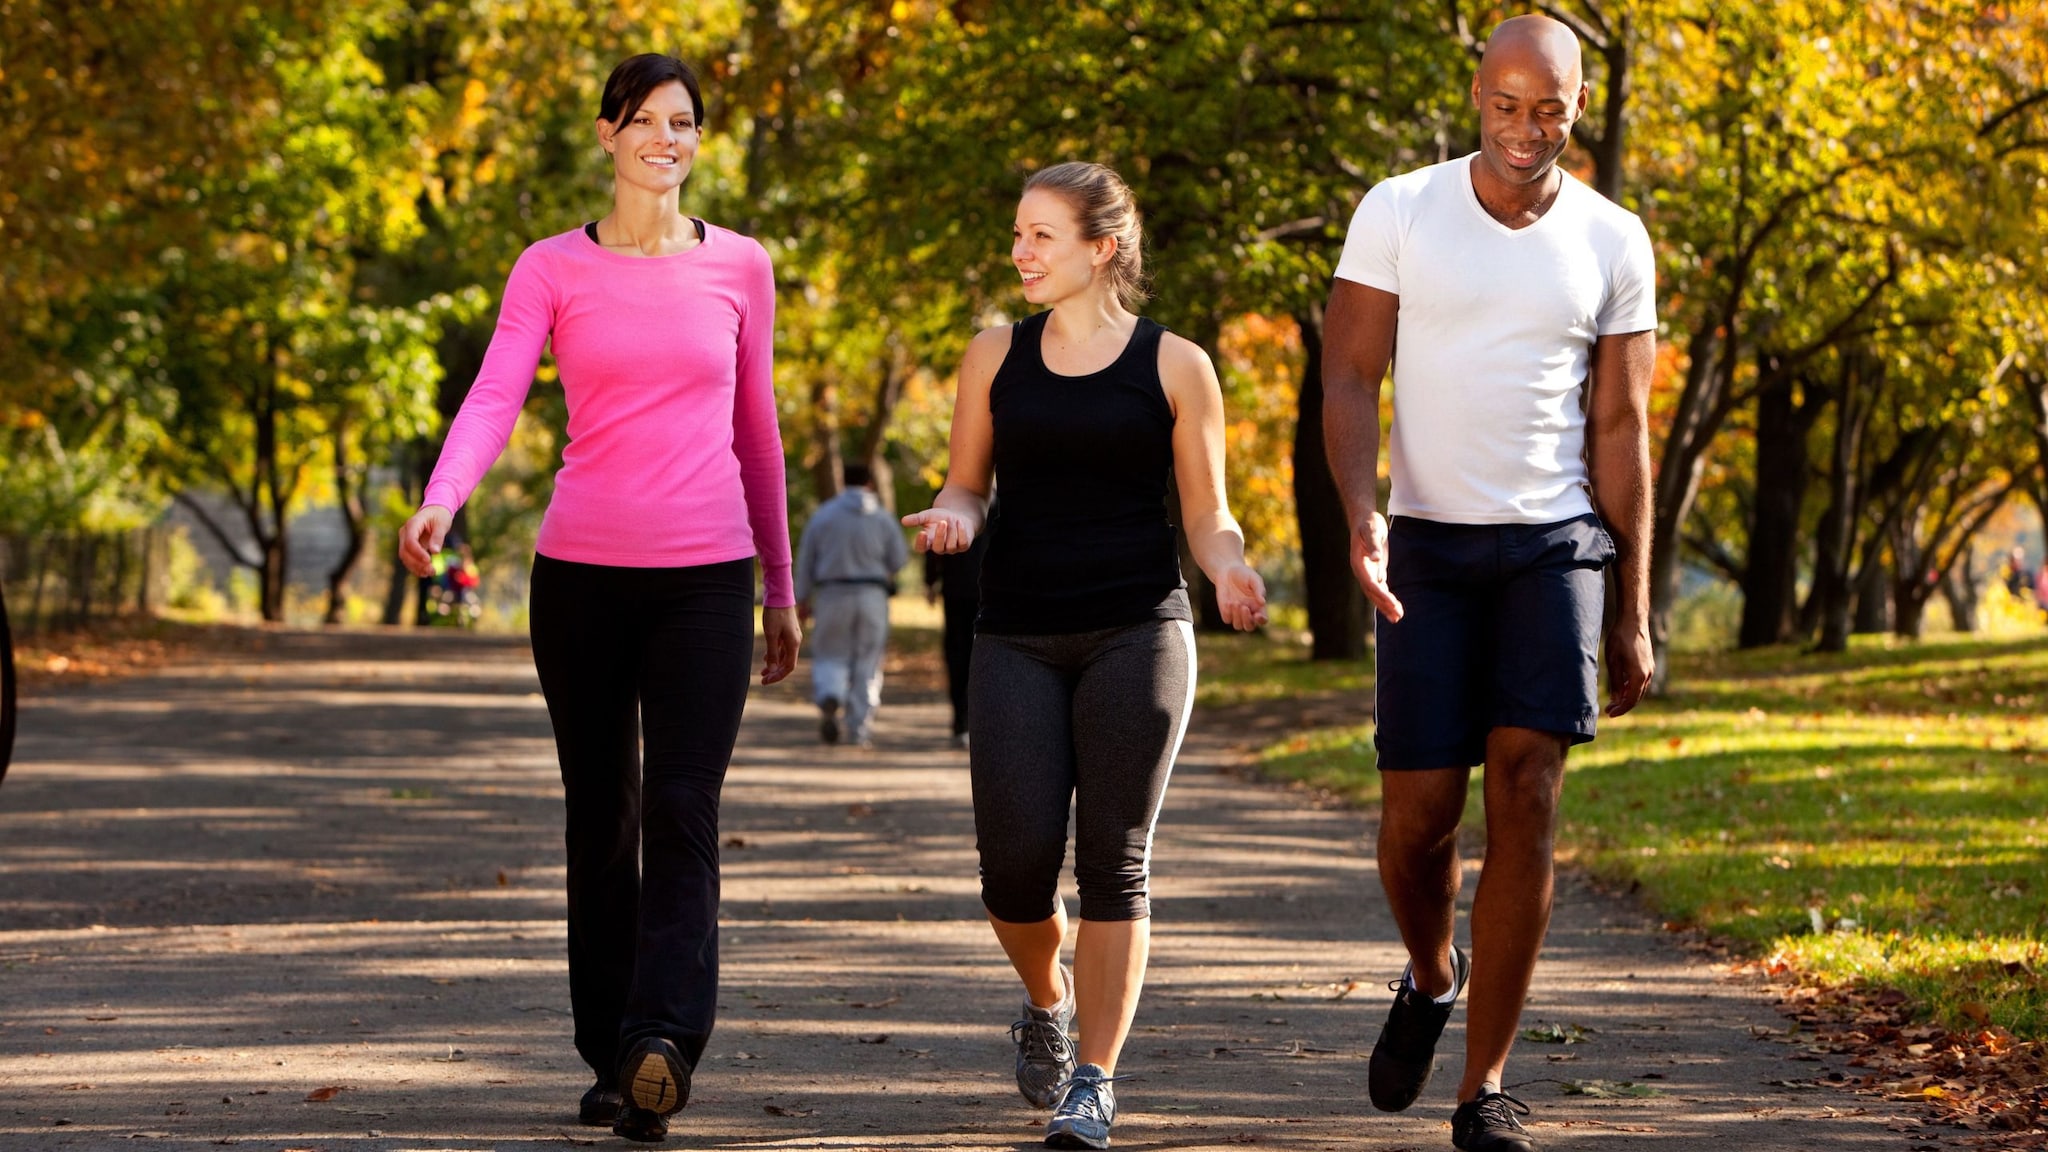 Two physically fit white women walking on a trail with a physically fit black man.